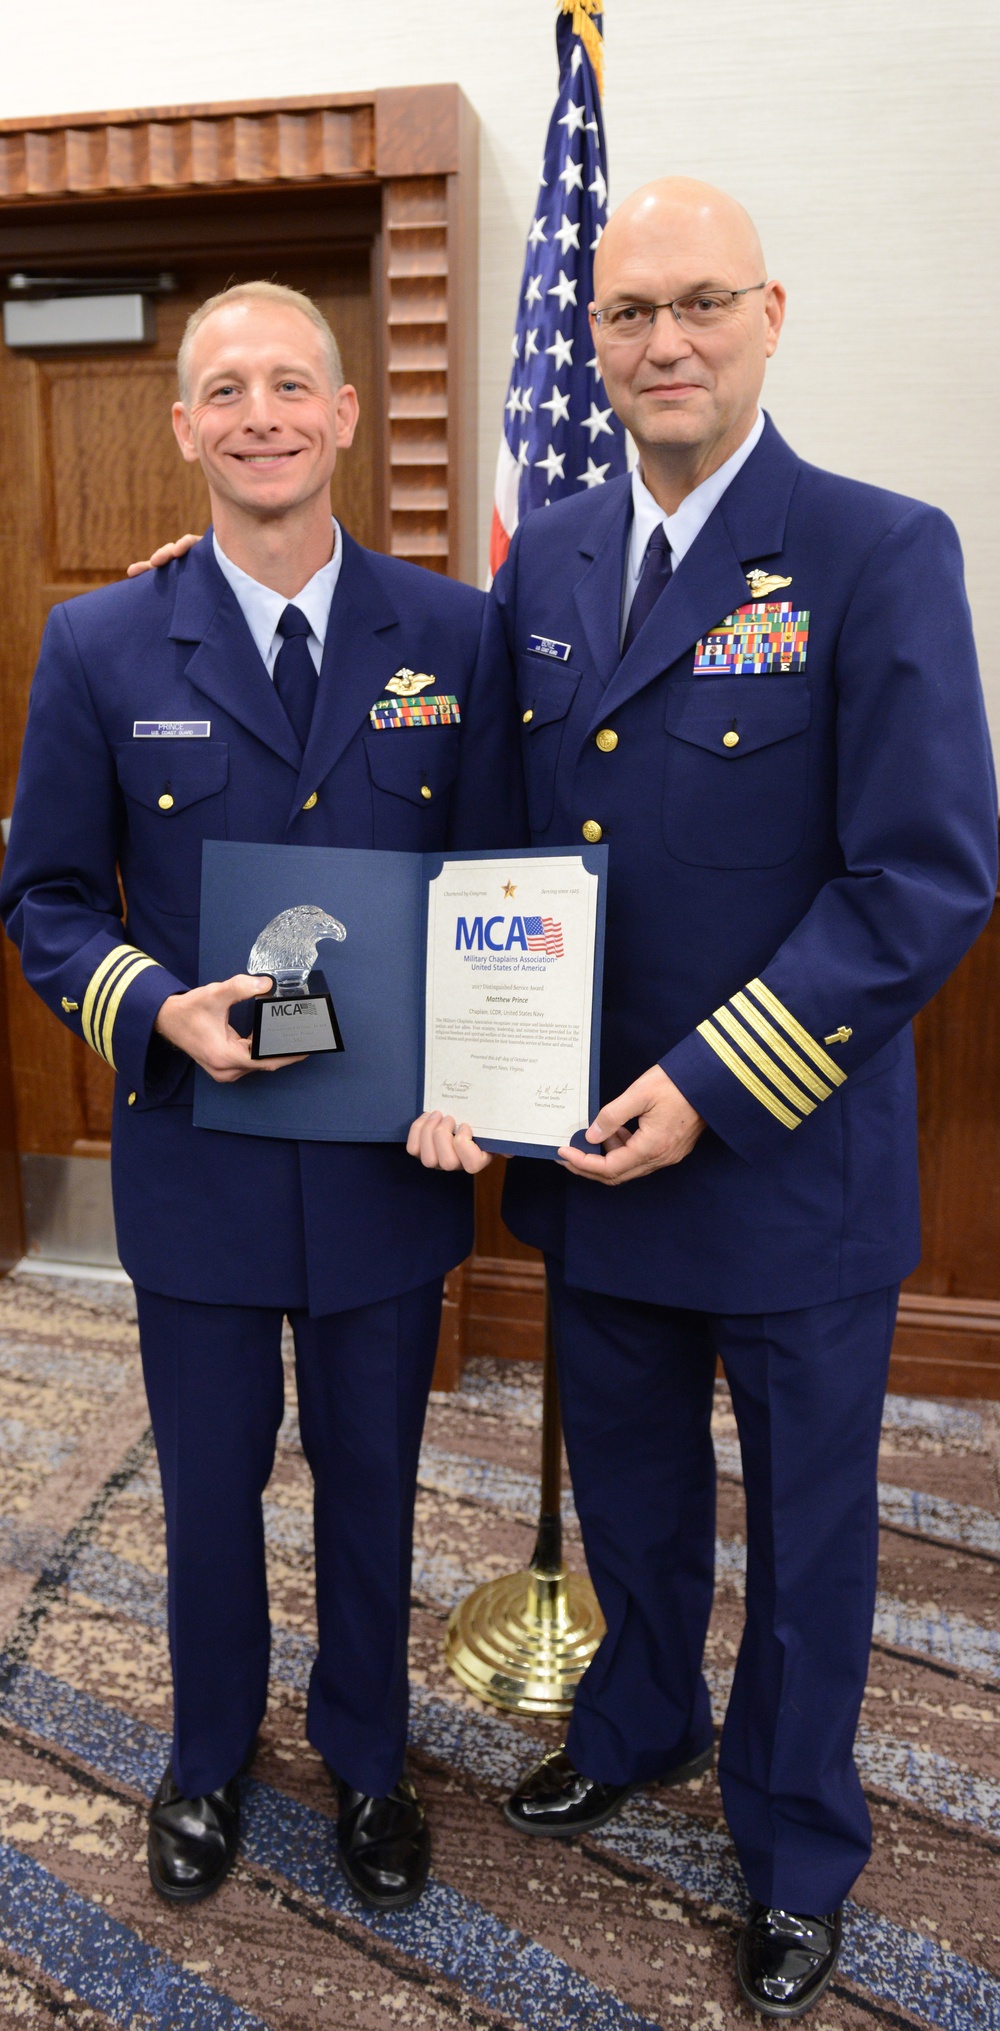 Chaplain presented award for distinguished service in Newport News, VA